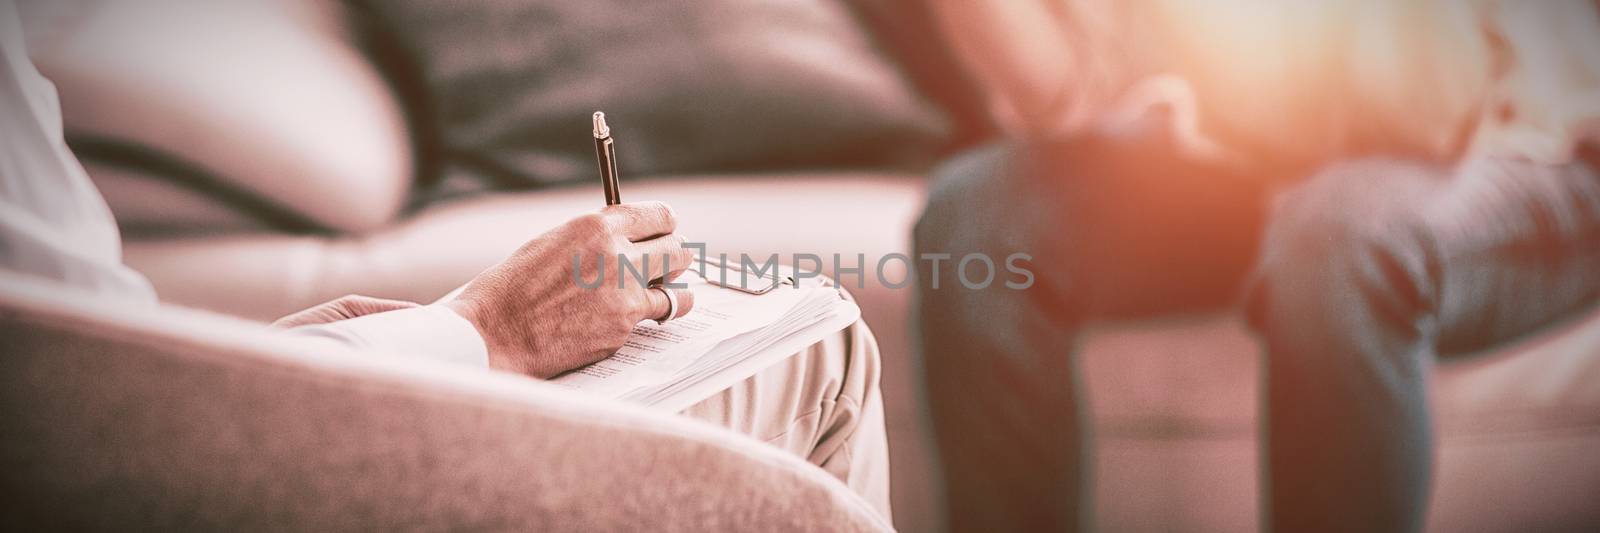 Therapist making notes of patient on sofa at home